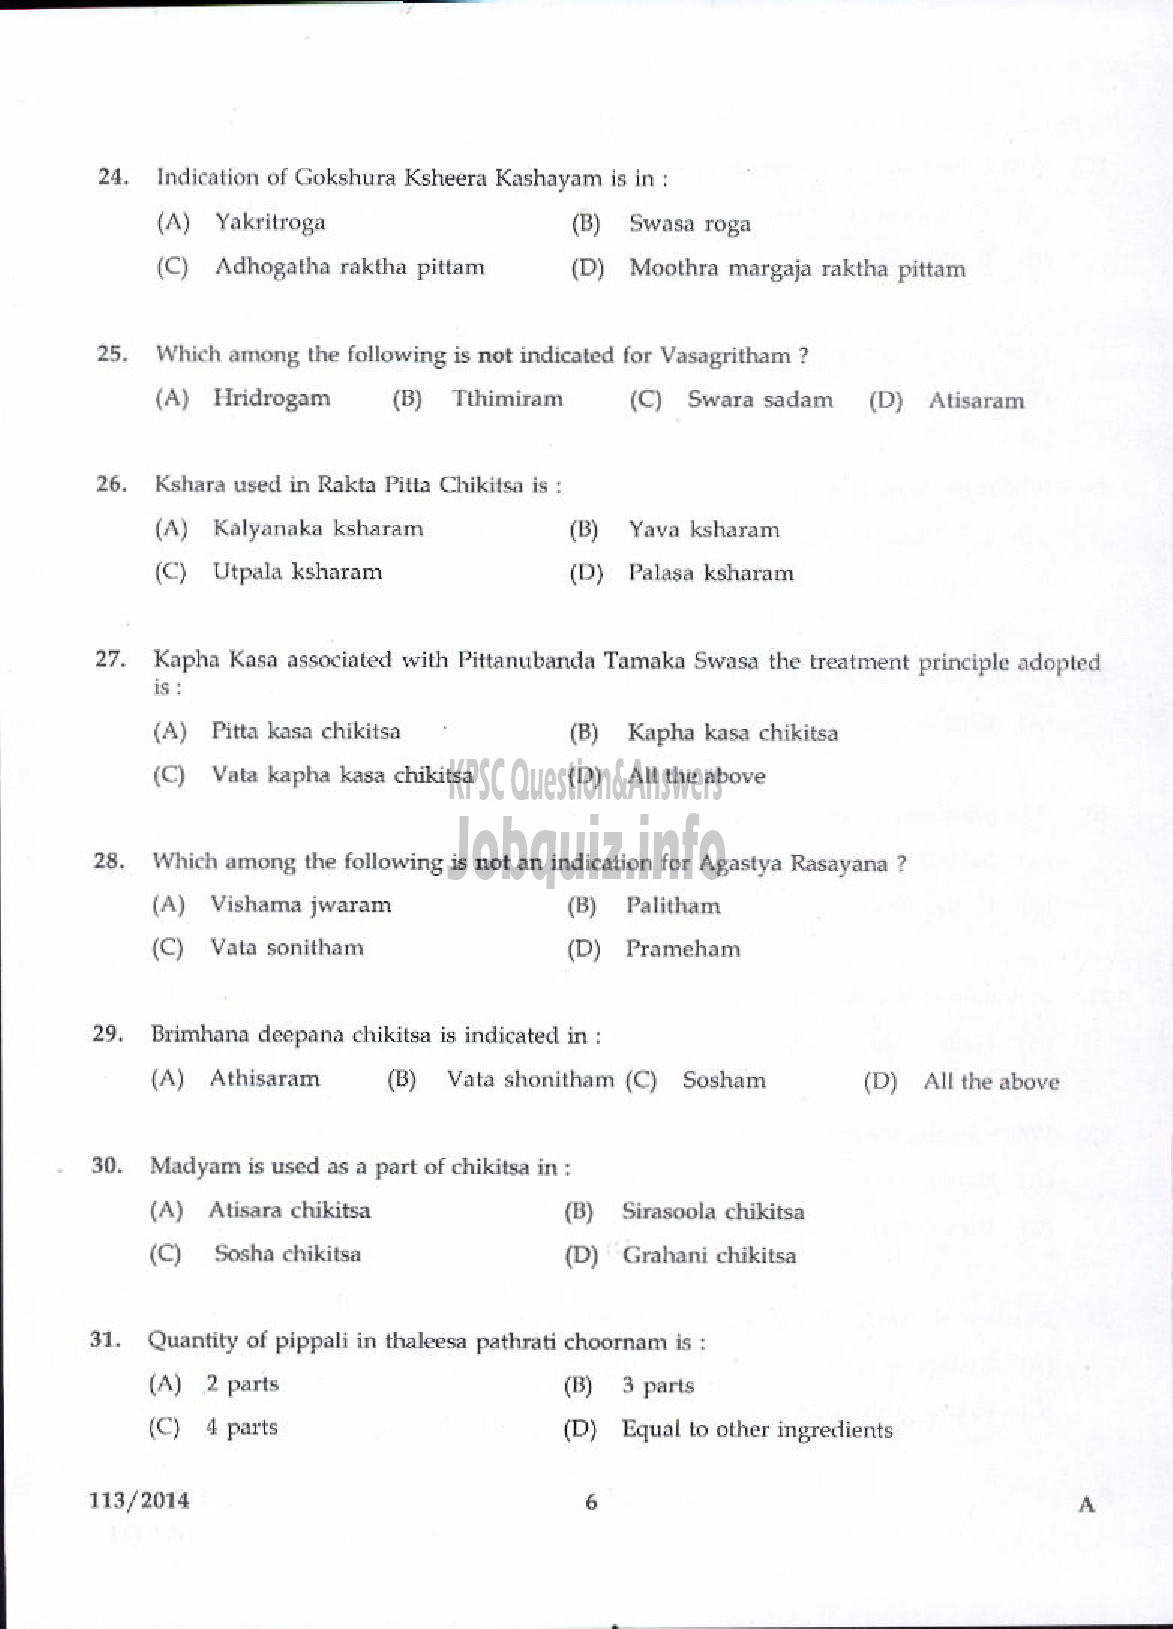 Kerala PSC Question Paper - DRUGS INSPECTOR AYURVEDA DRUGS CONTROL-4